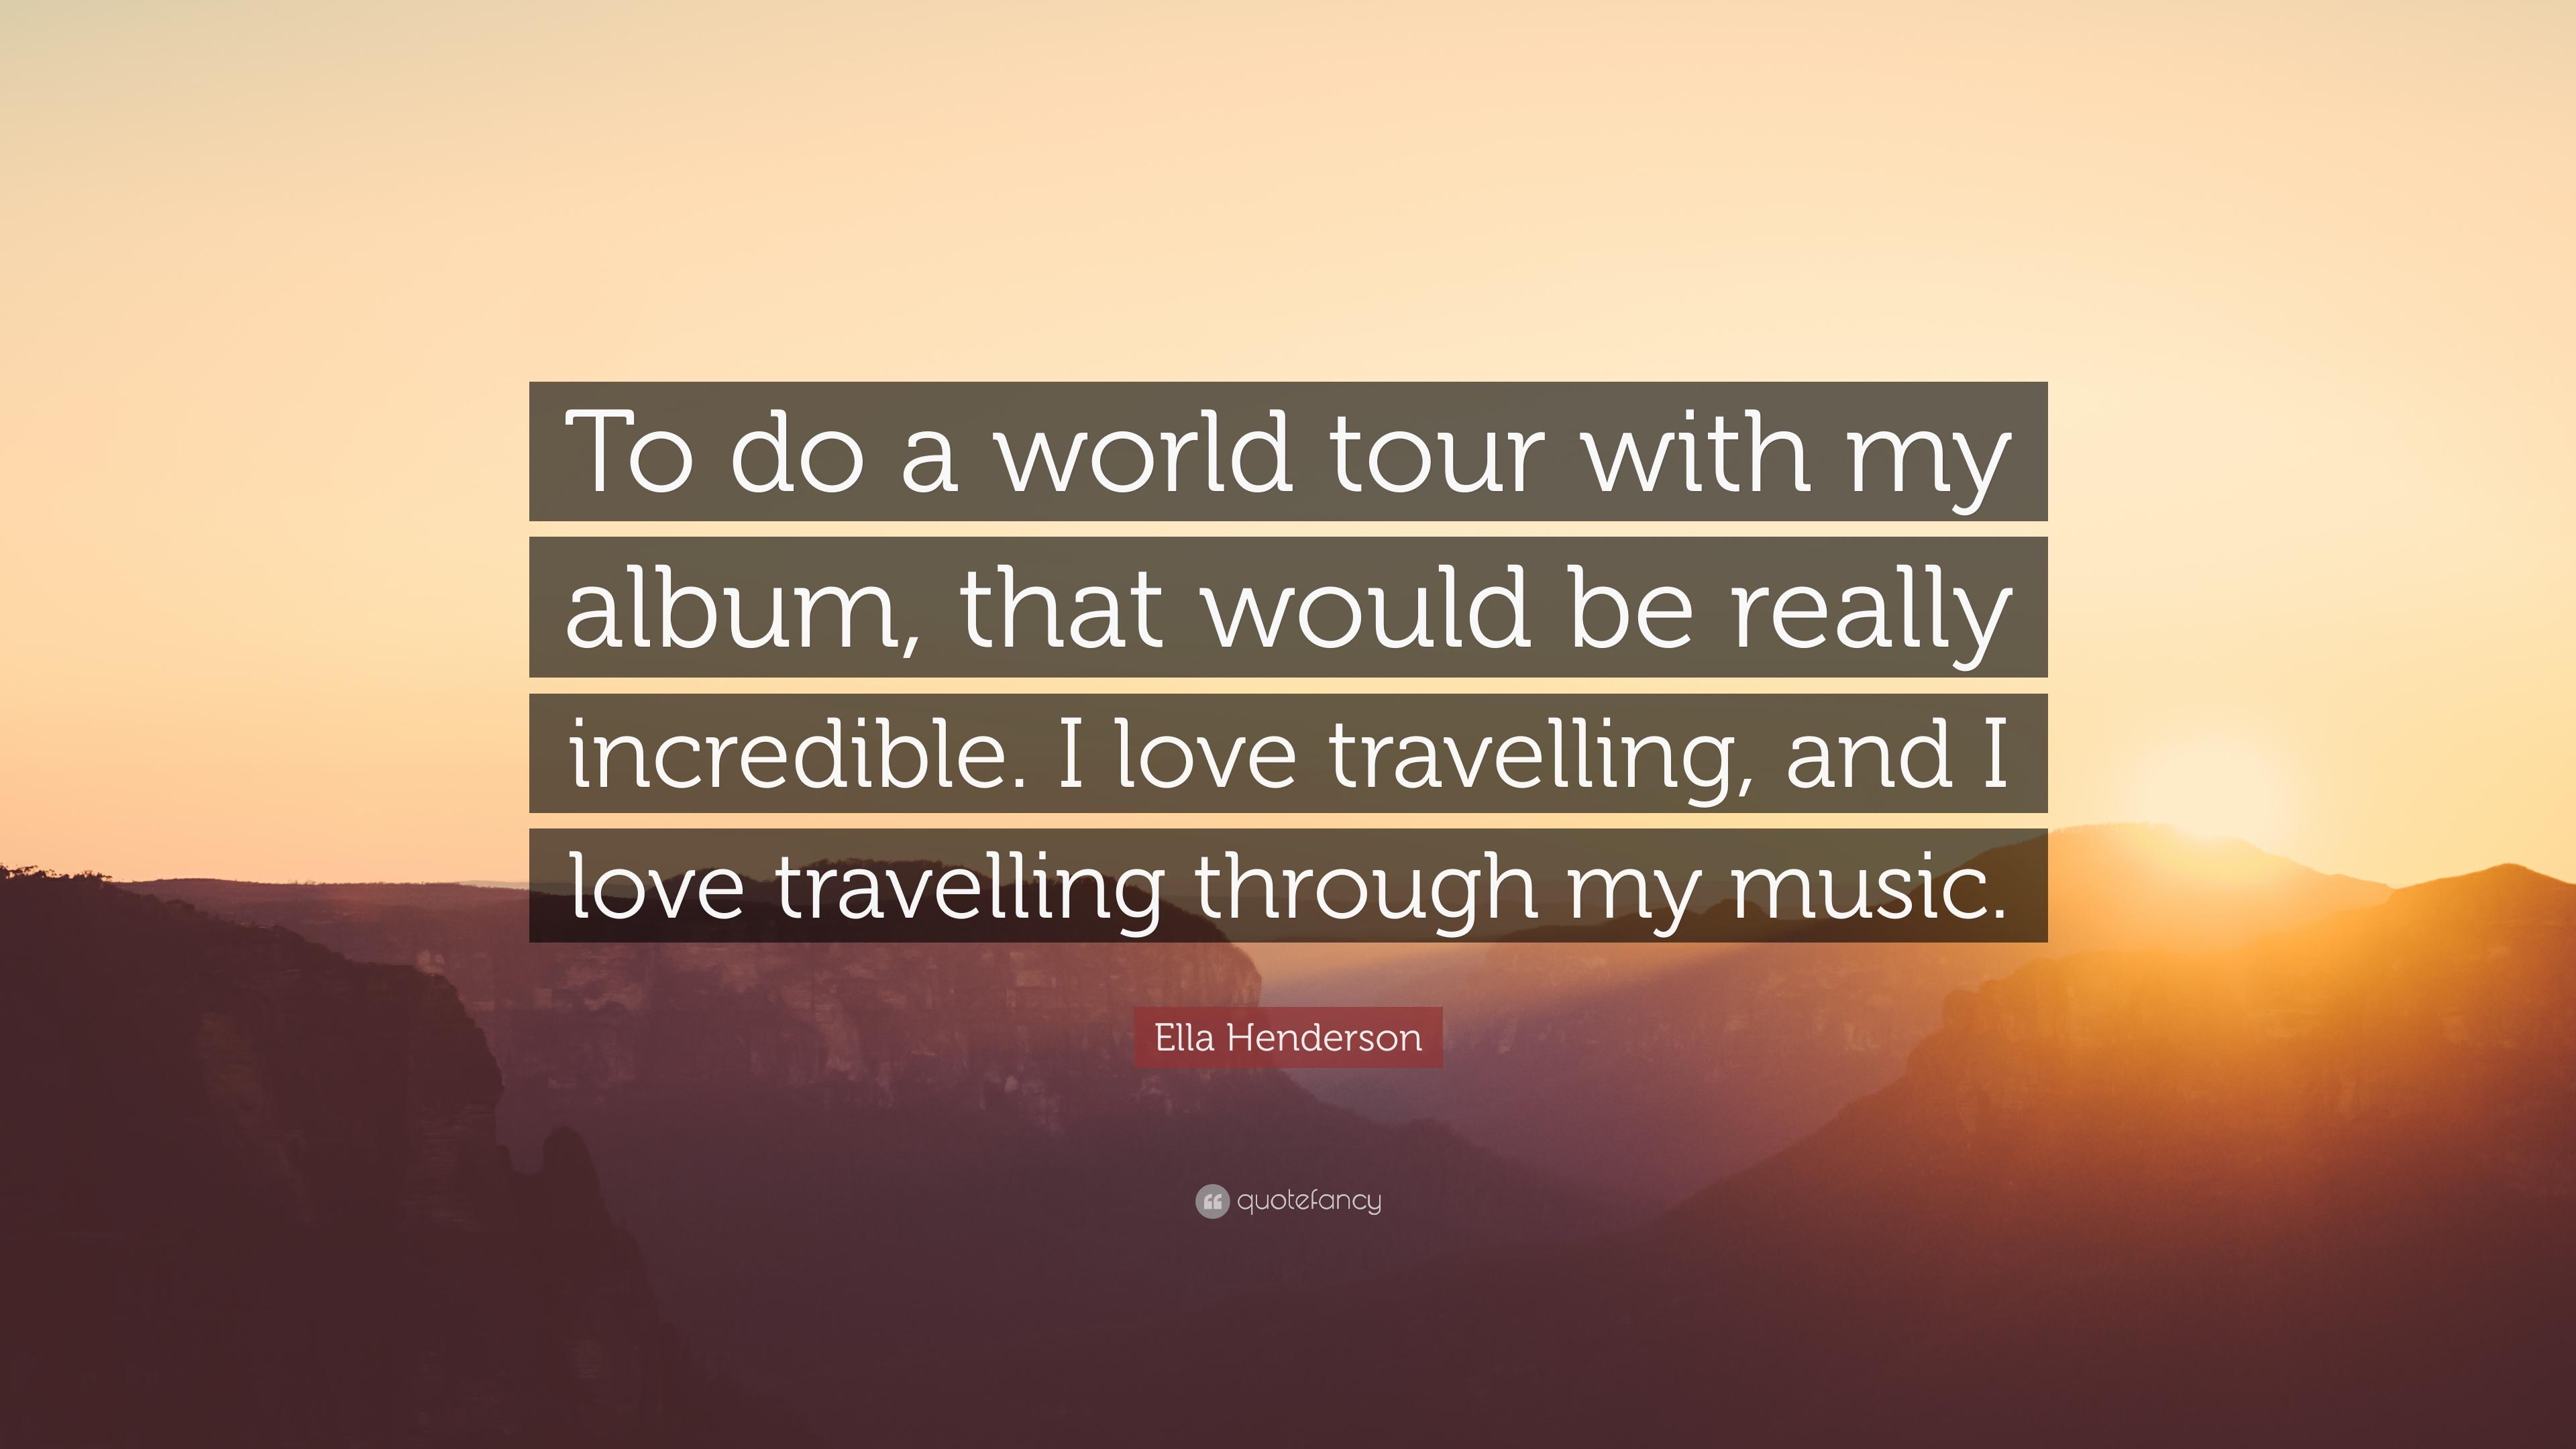 Ella Henderson Quote: “To do a world tour with my album